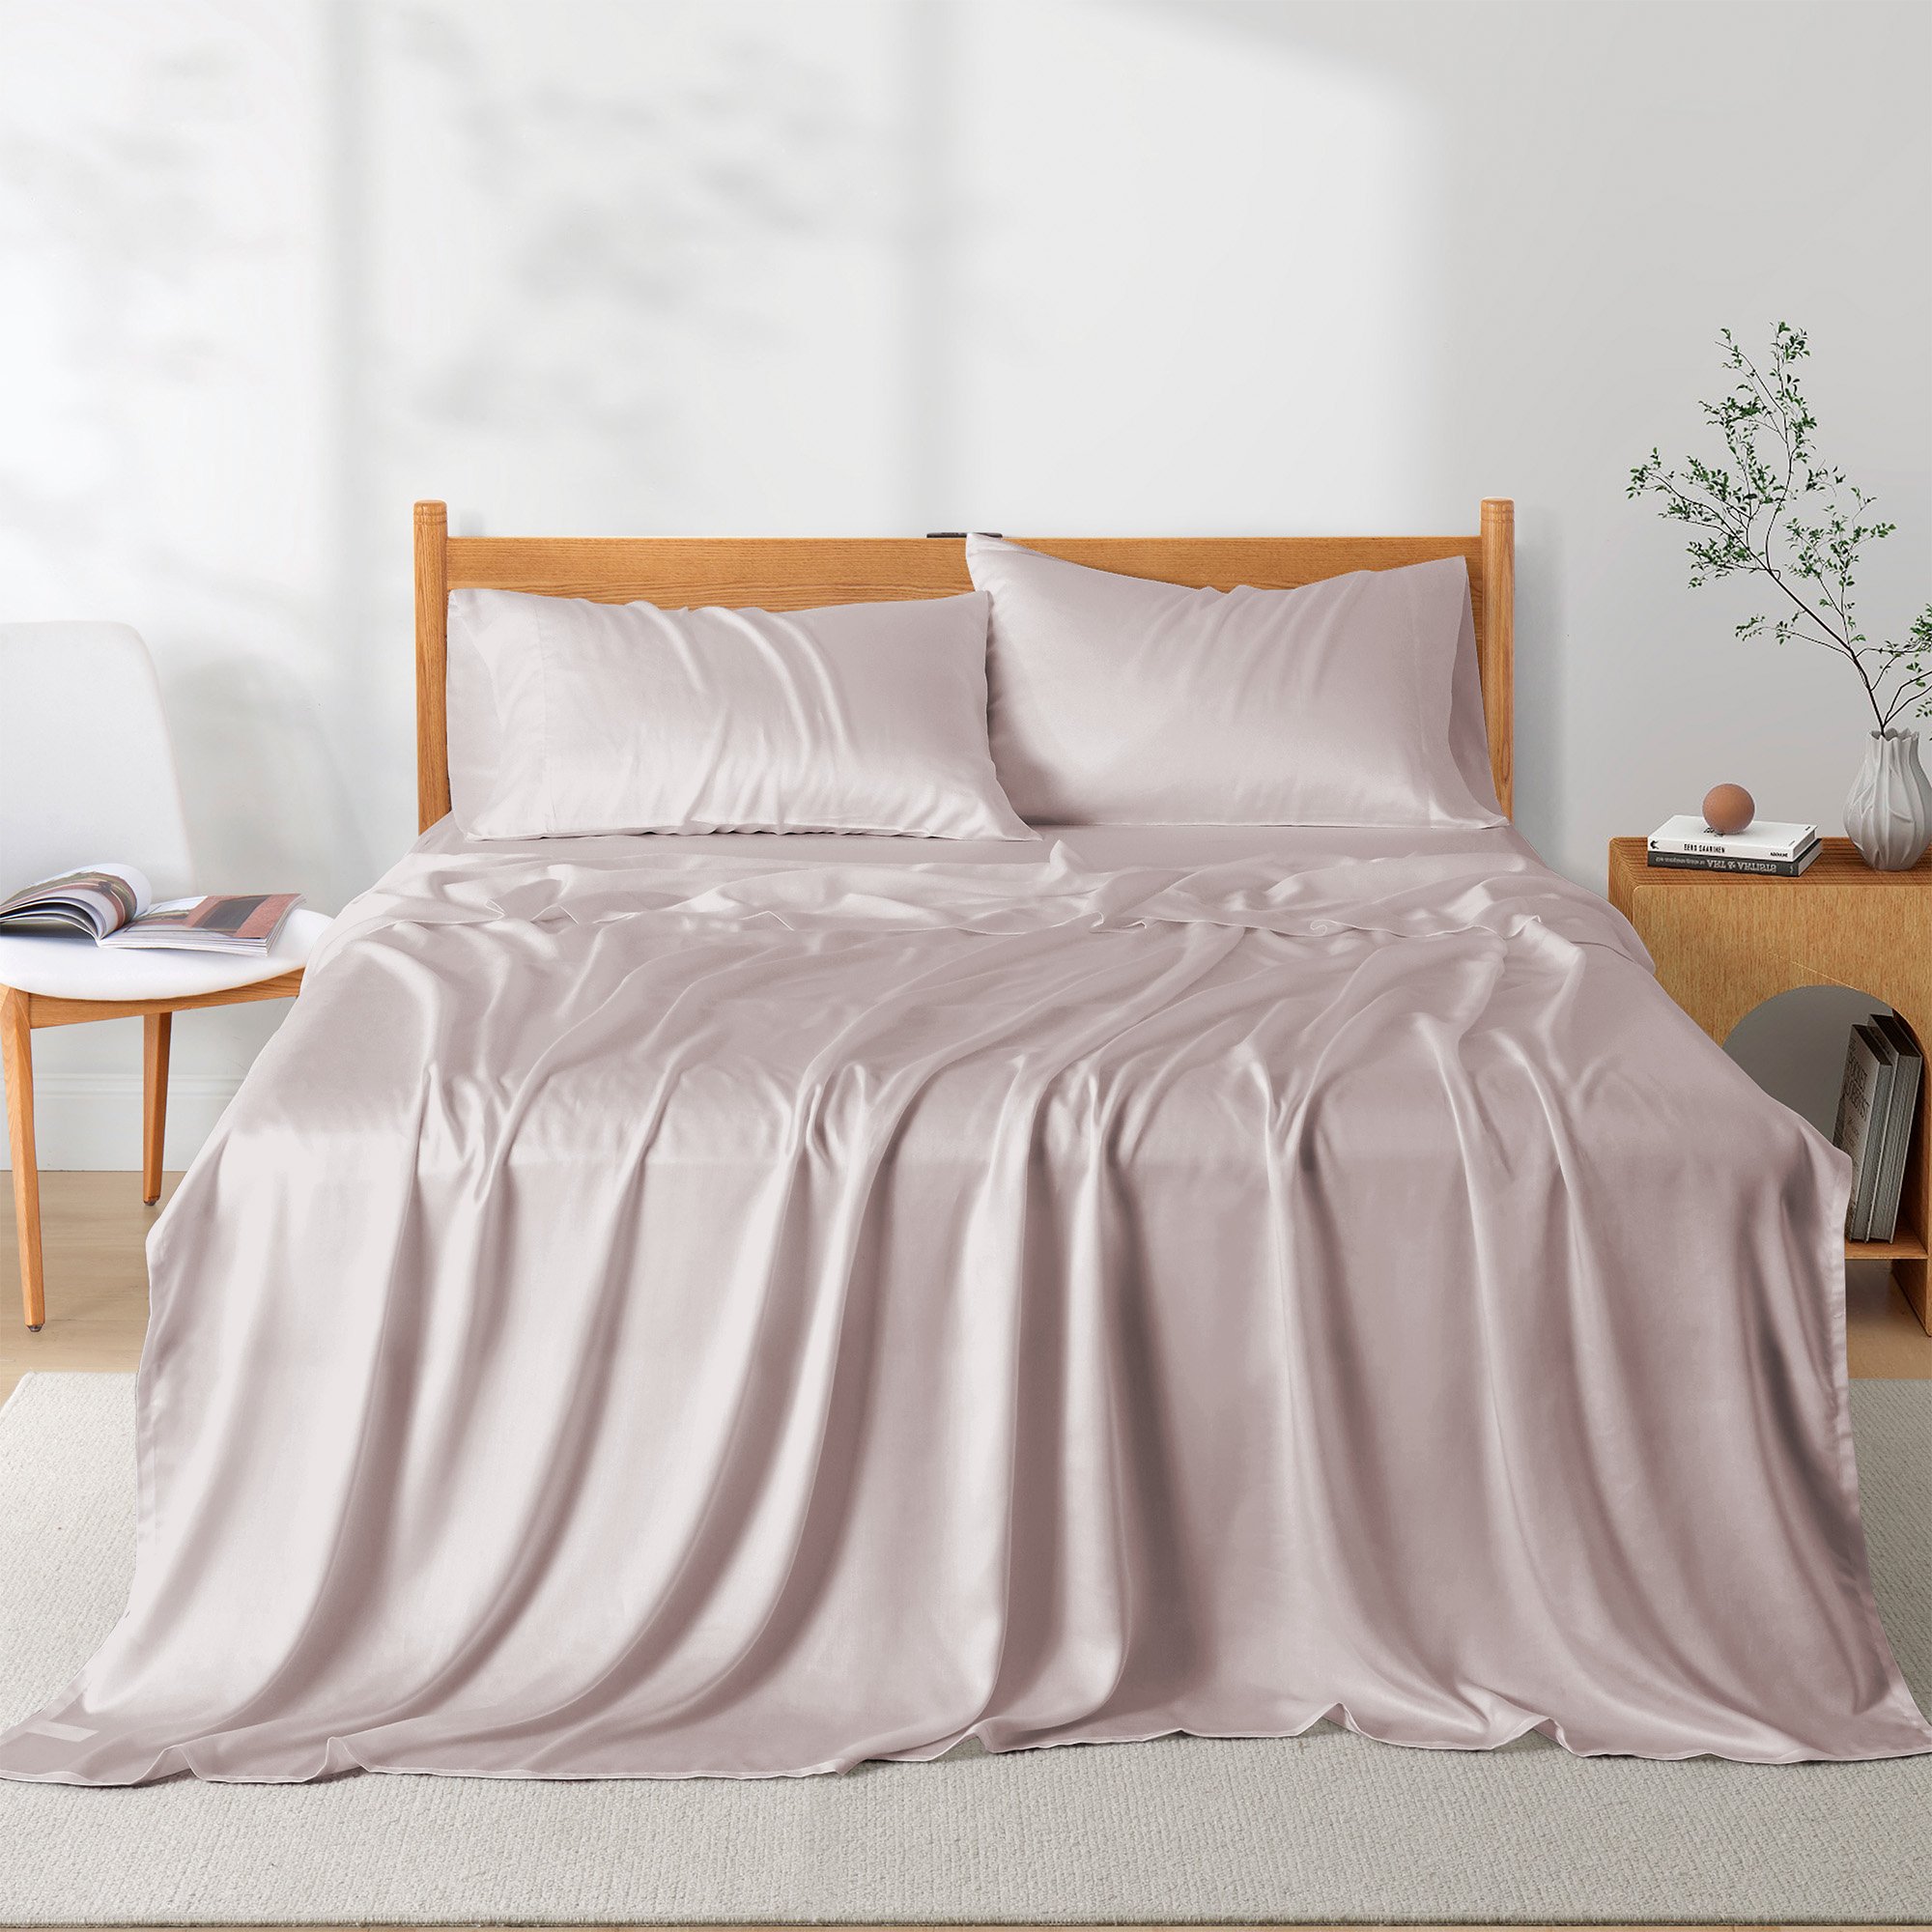 Tencel Lyocell Bed Sheets Silky Soft & Smooth Breathable Sheets, Luxury Hotel Bedding - King Size